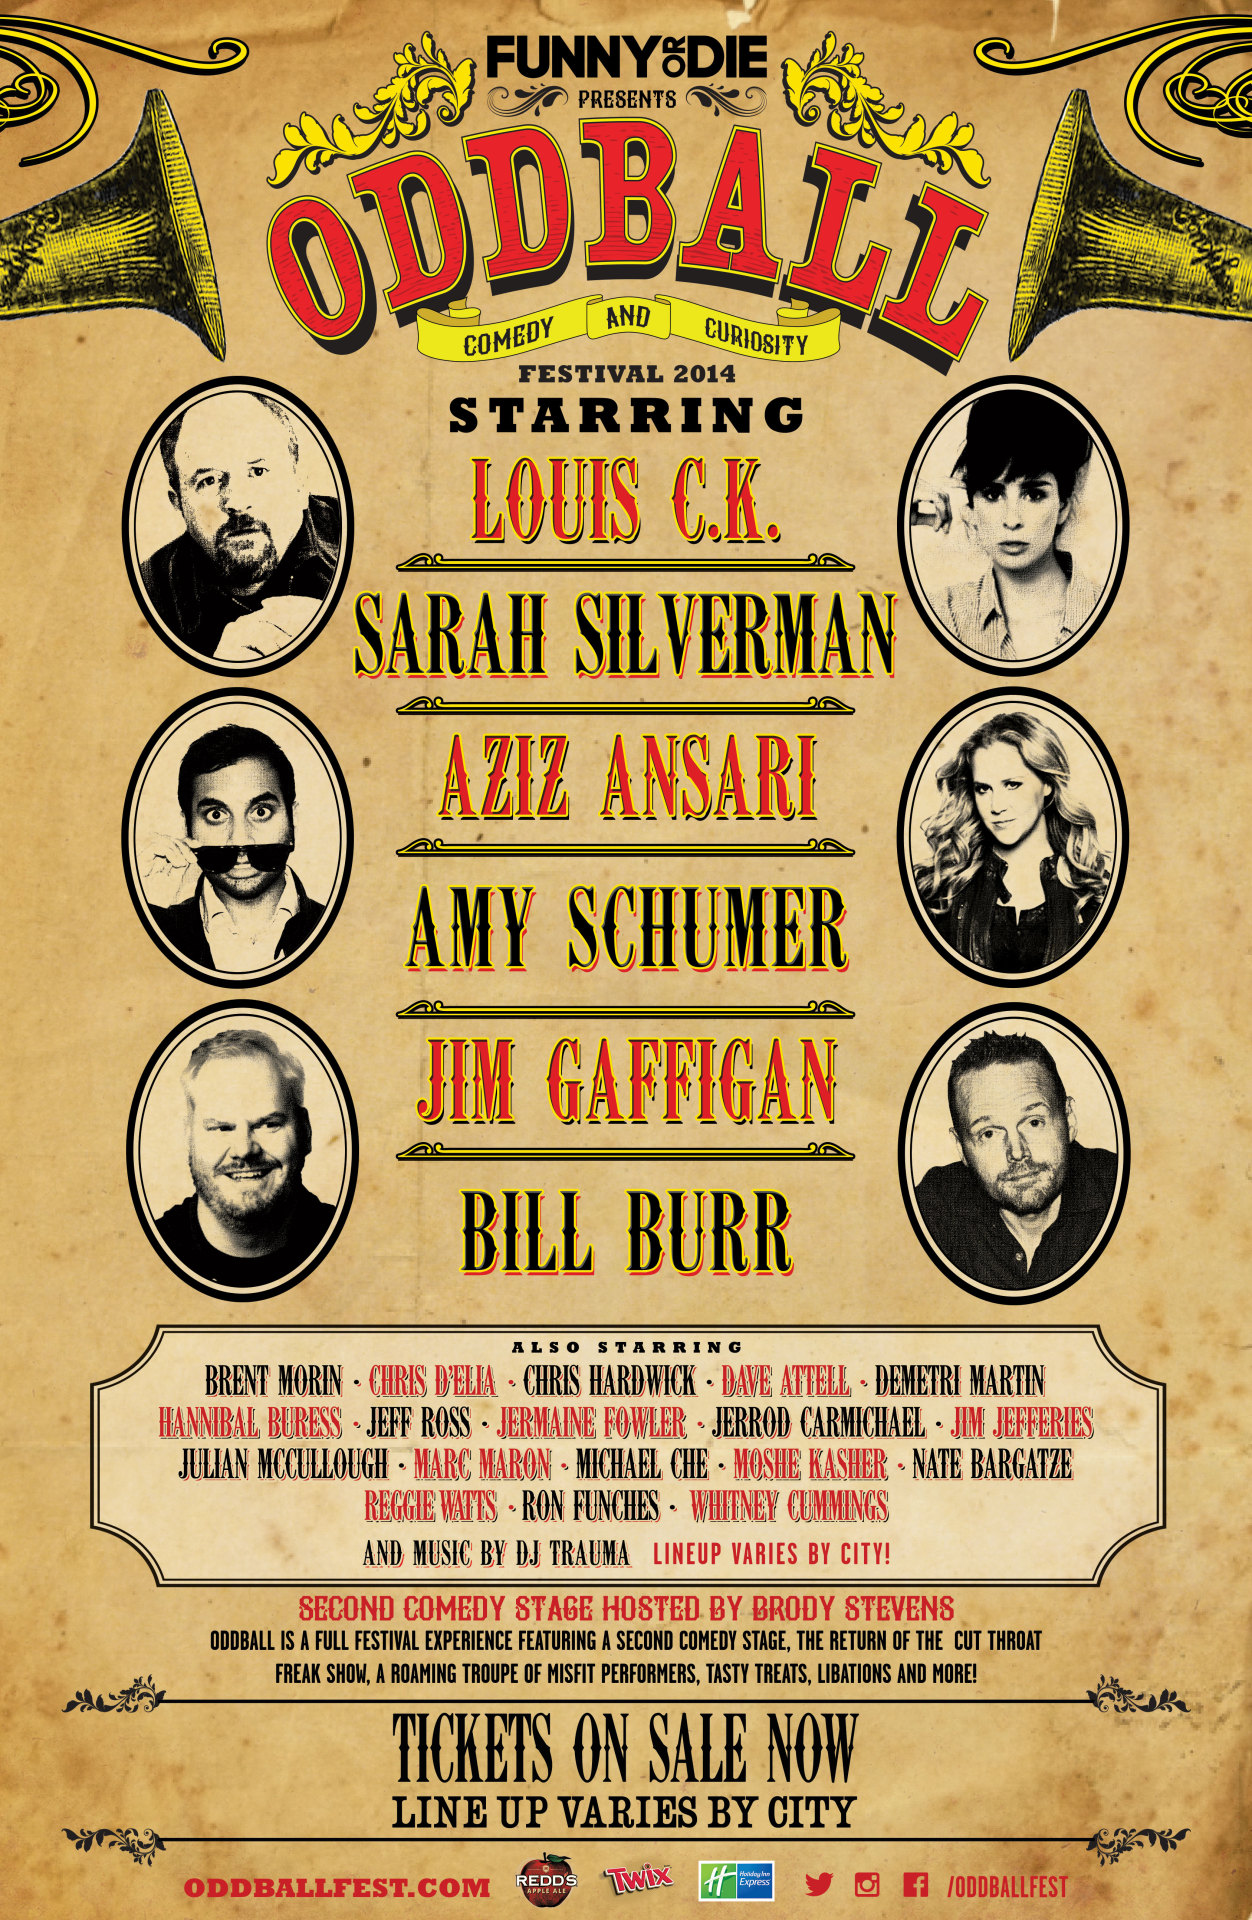 Oddball Comedy & Curiosity Festival
Oddball Comedy & Curiosity Festival is bringing the world’s top comedians, including Louis C.K., Aziz Ansari, Sarah Silverman, and many more to a city near you!
Get your tickets now!